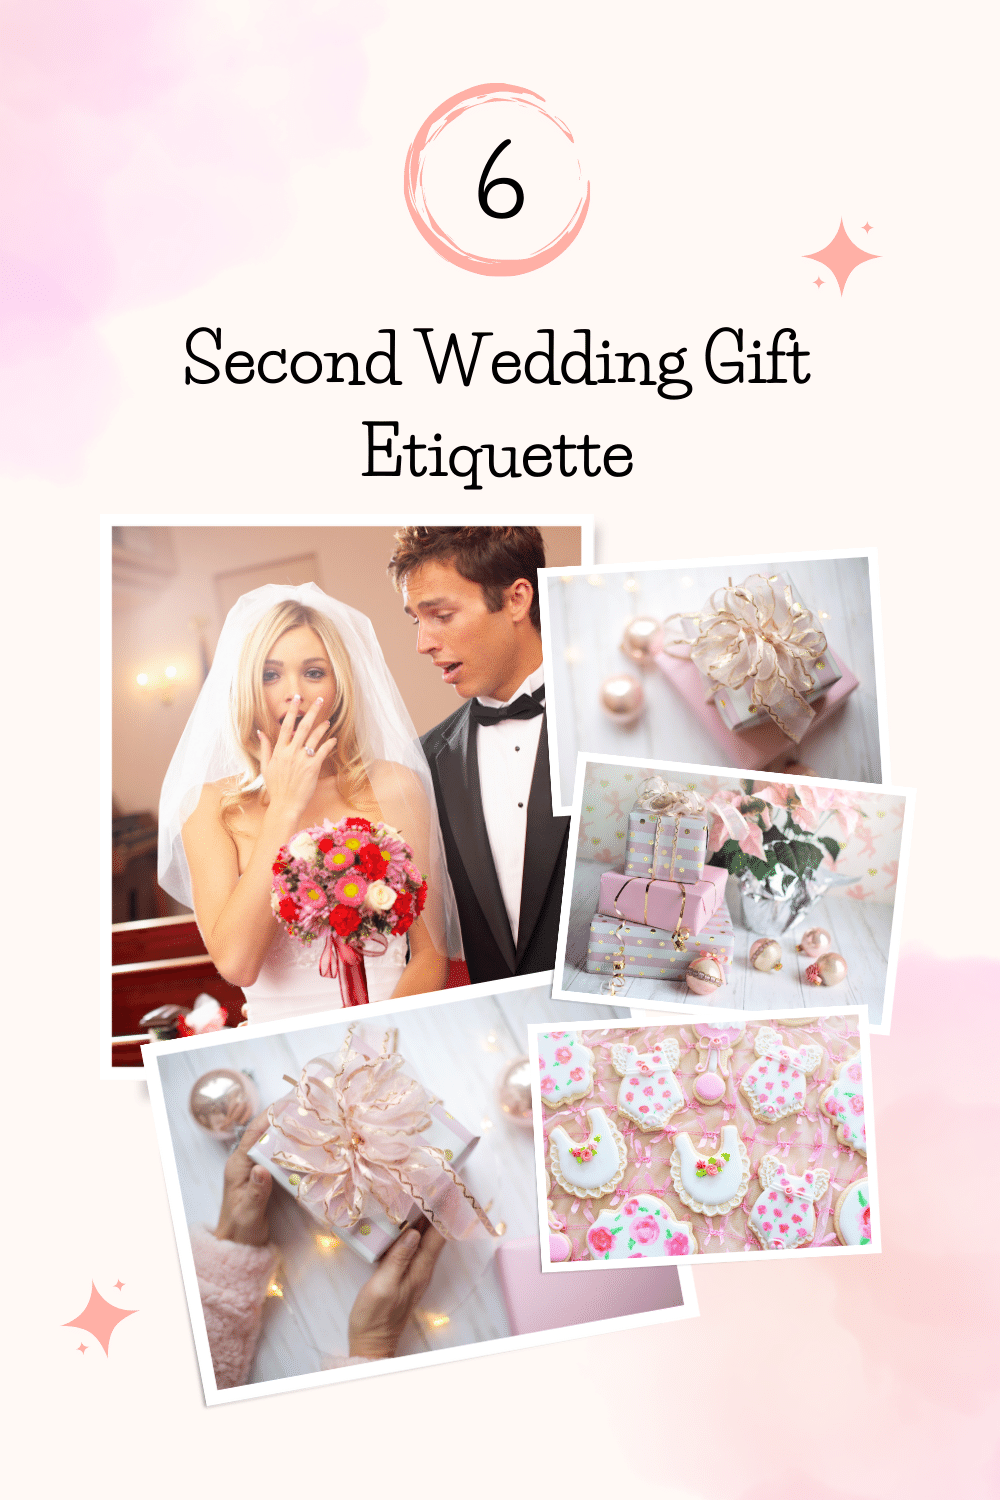 Master second wedding gift etiquette: Find thoughtful ideas & tips. Make your presence meaningful. Perfect gifts for remarriages.